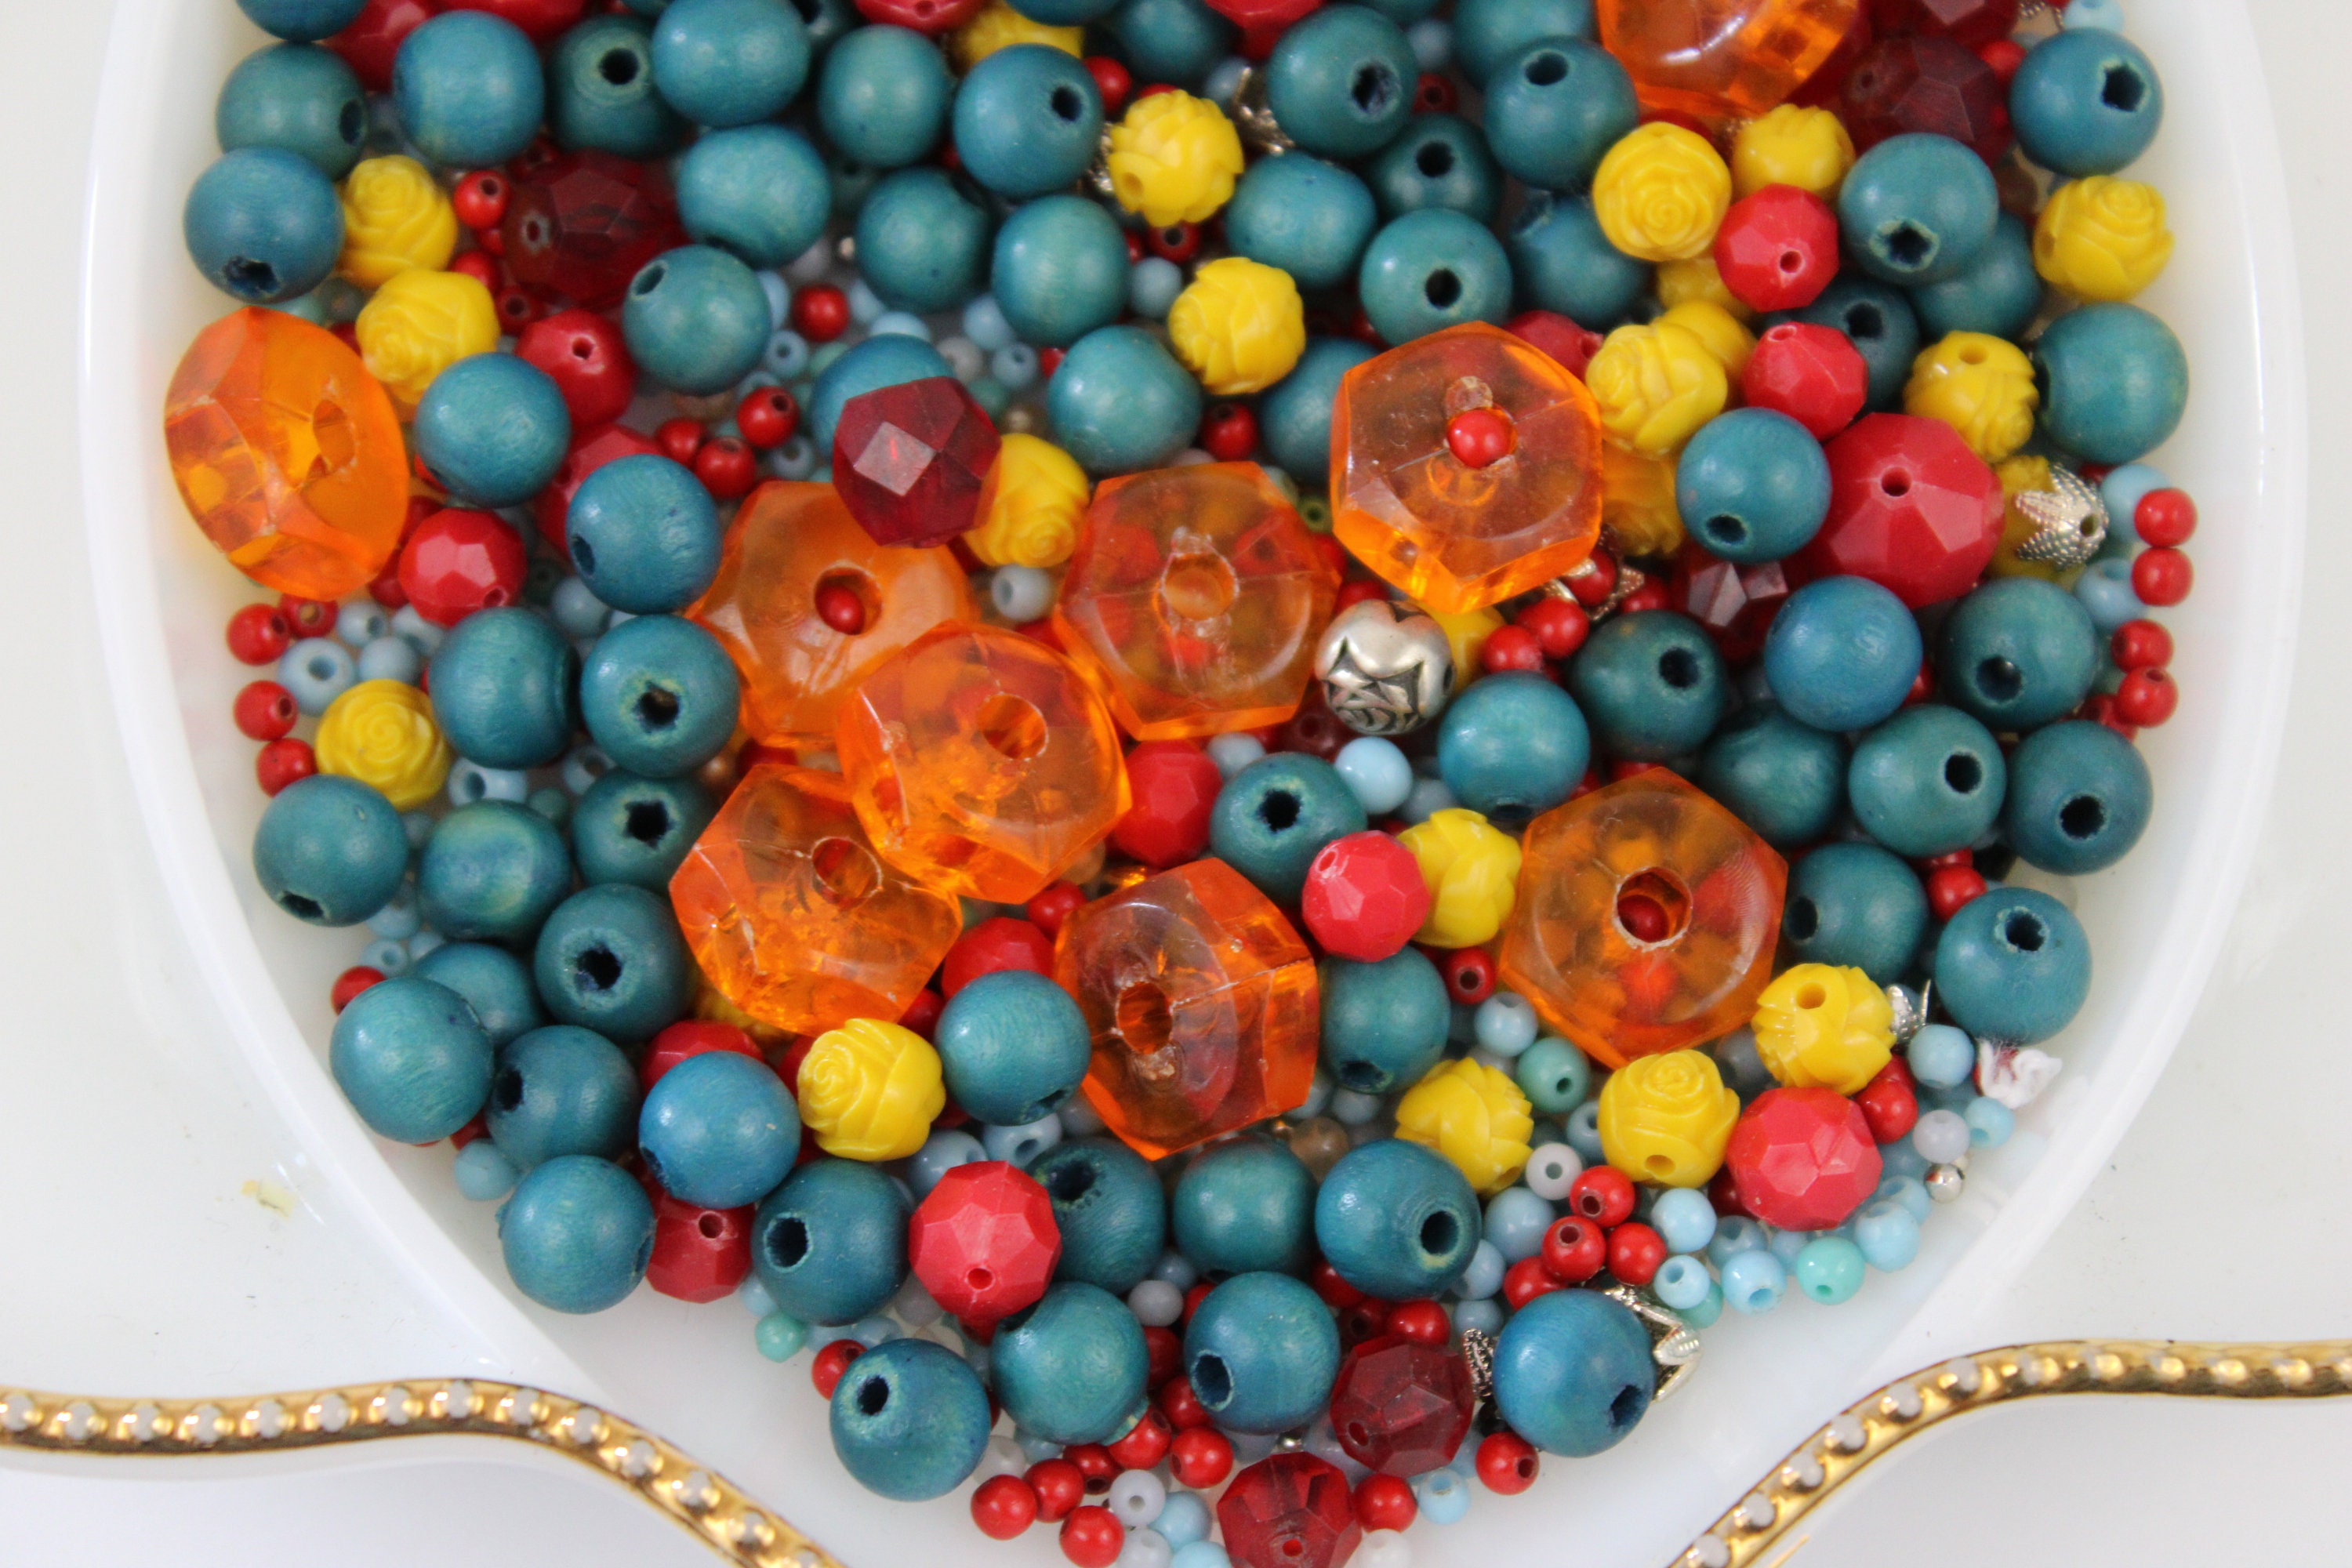 1/2 Lb Assorted Beads and Findings, Destash Beads for Jewelry